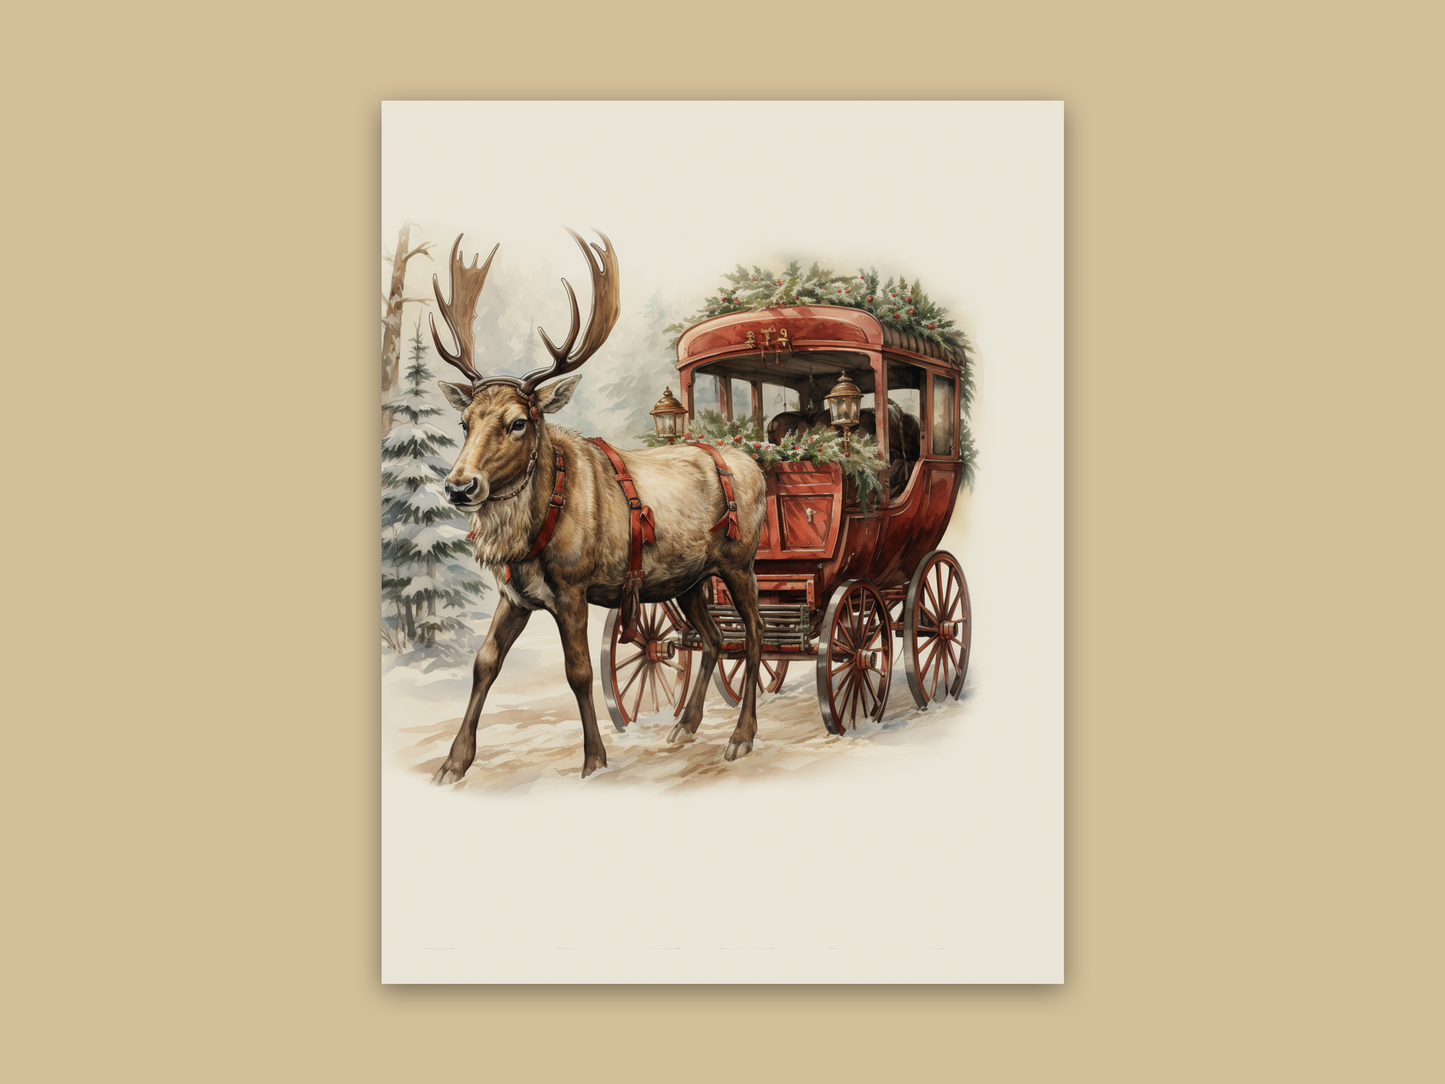 Whimsical Christmas boxed cards pack